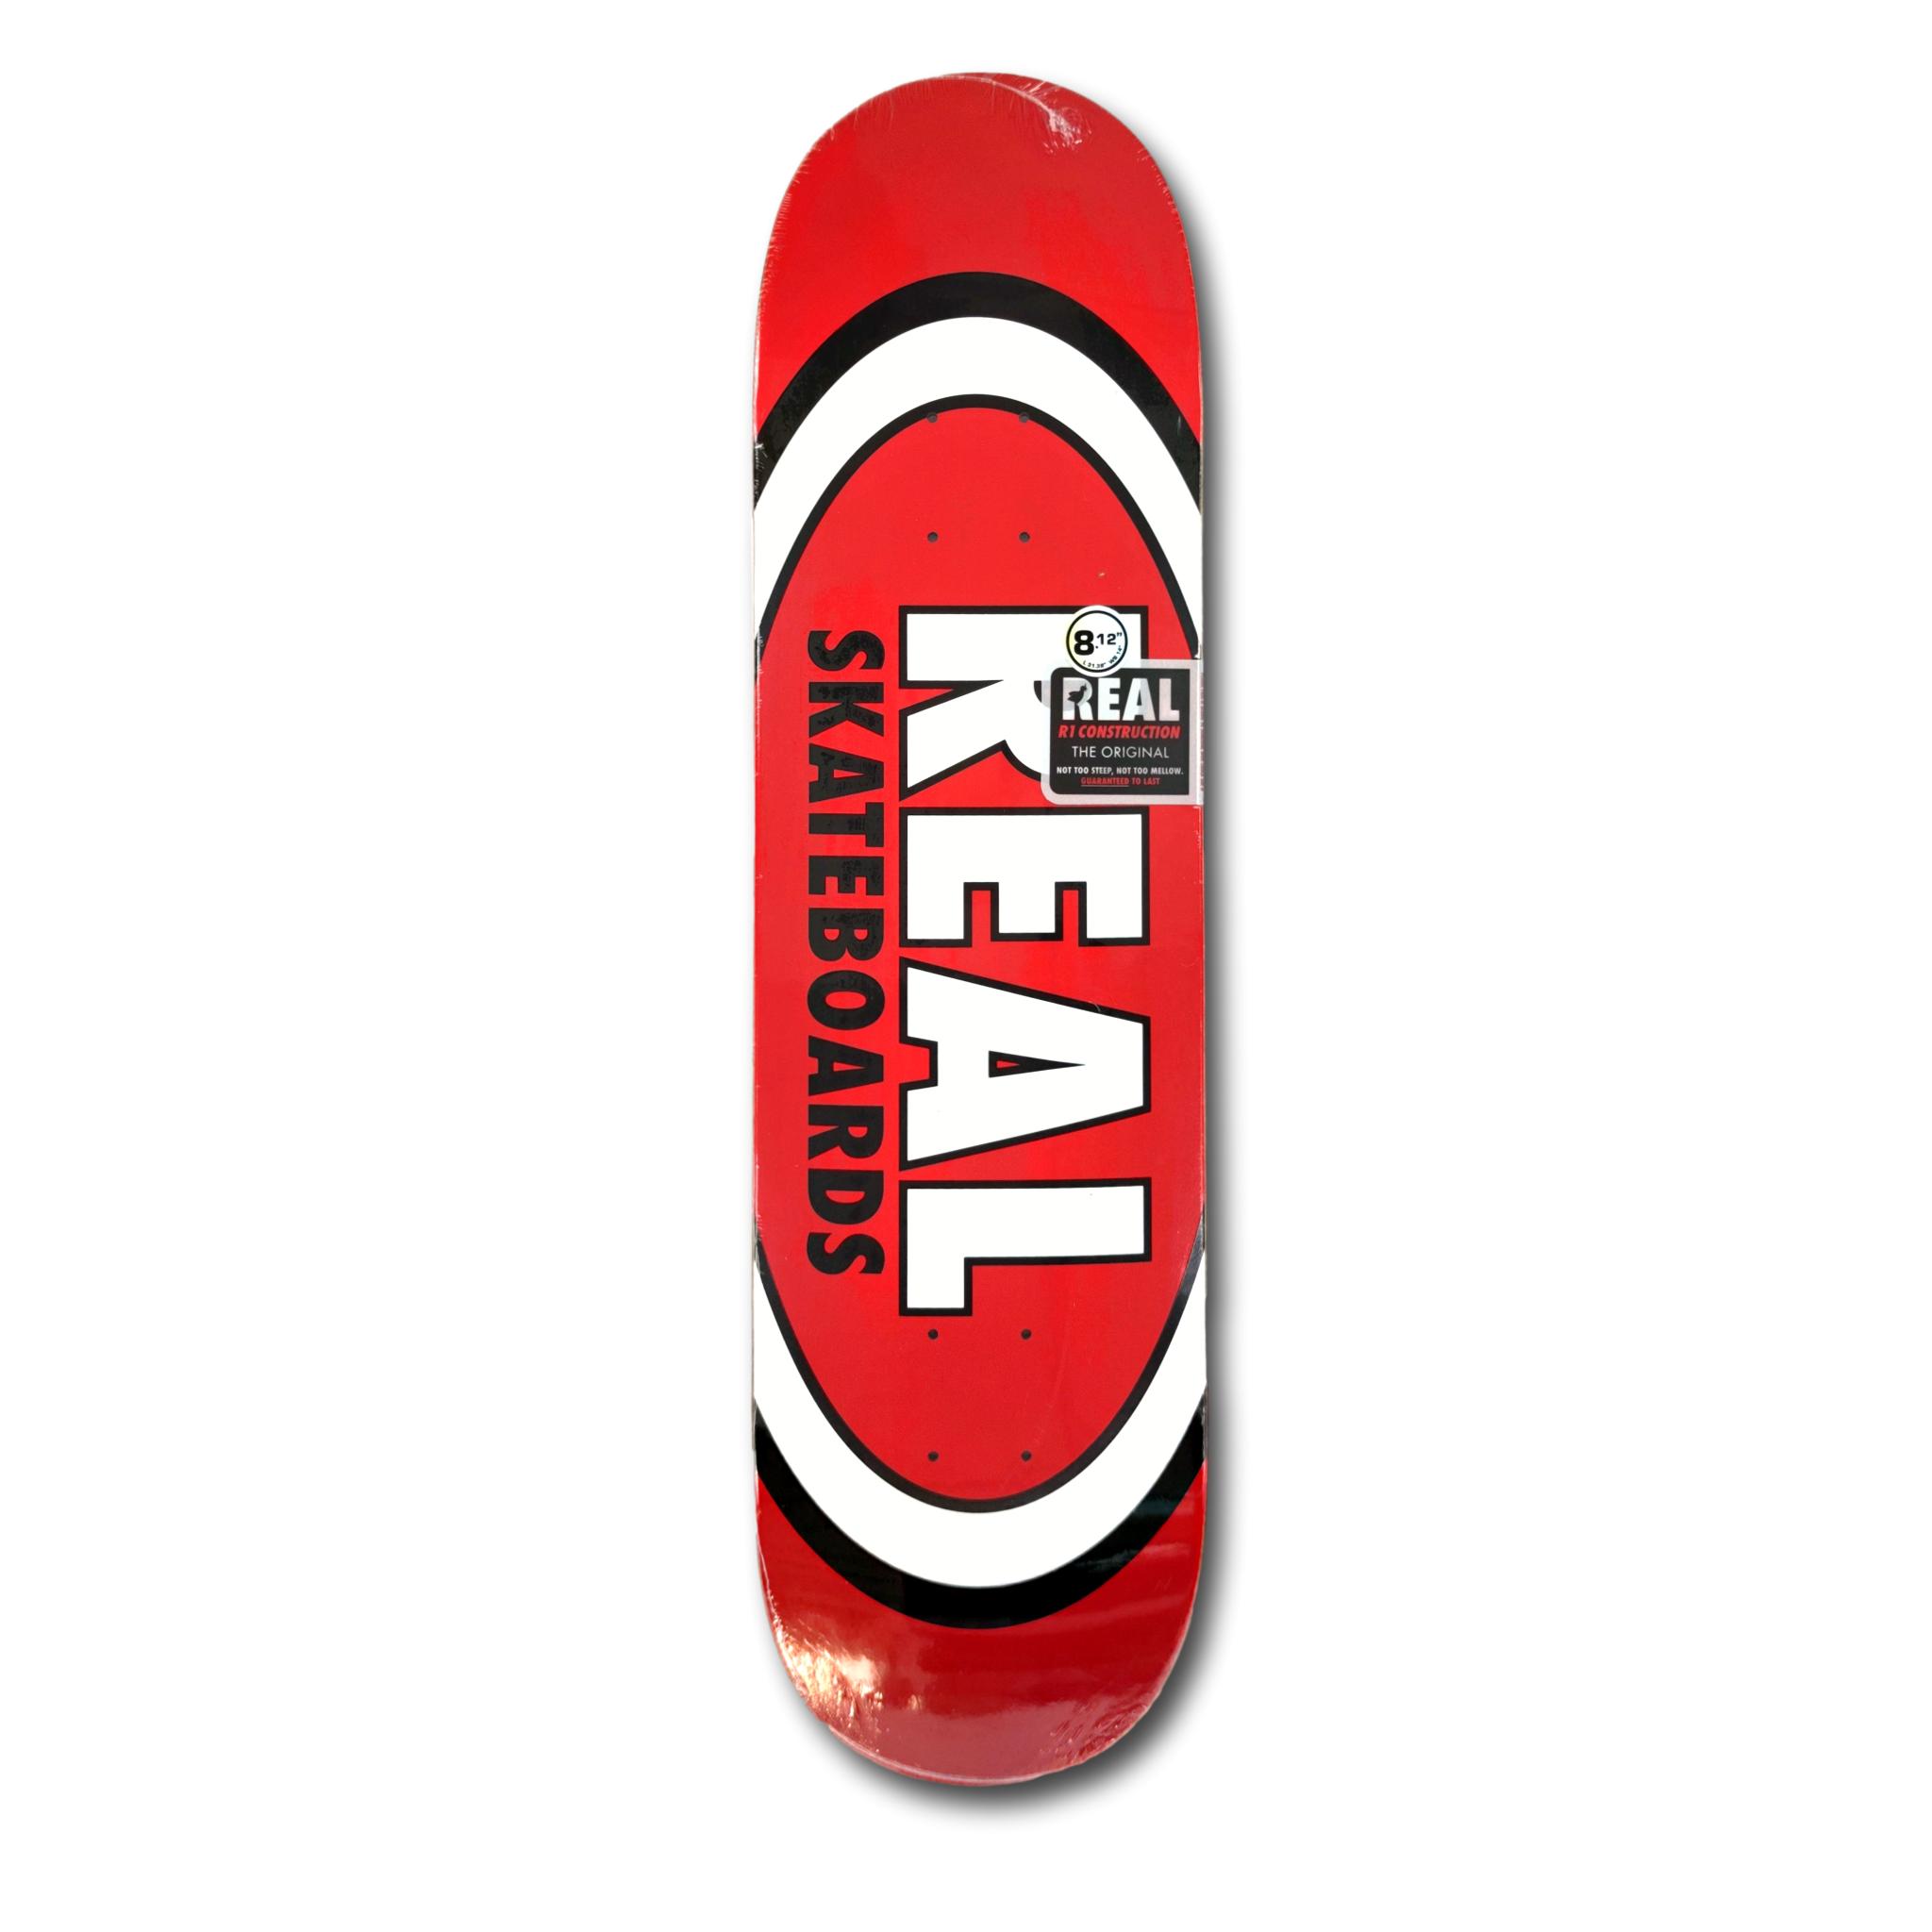 REAL SKATEBOARDS OVAL TEAM CLASSIC 8.12